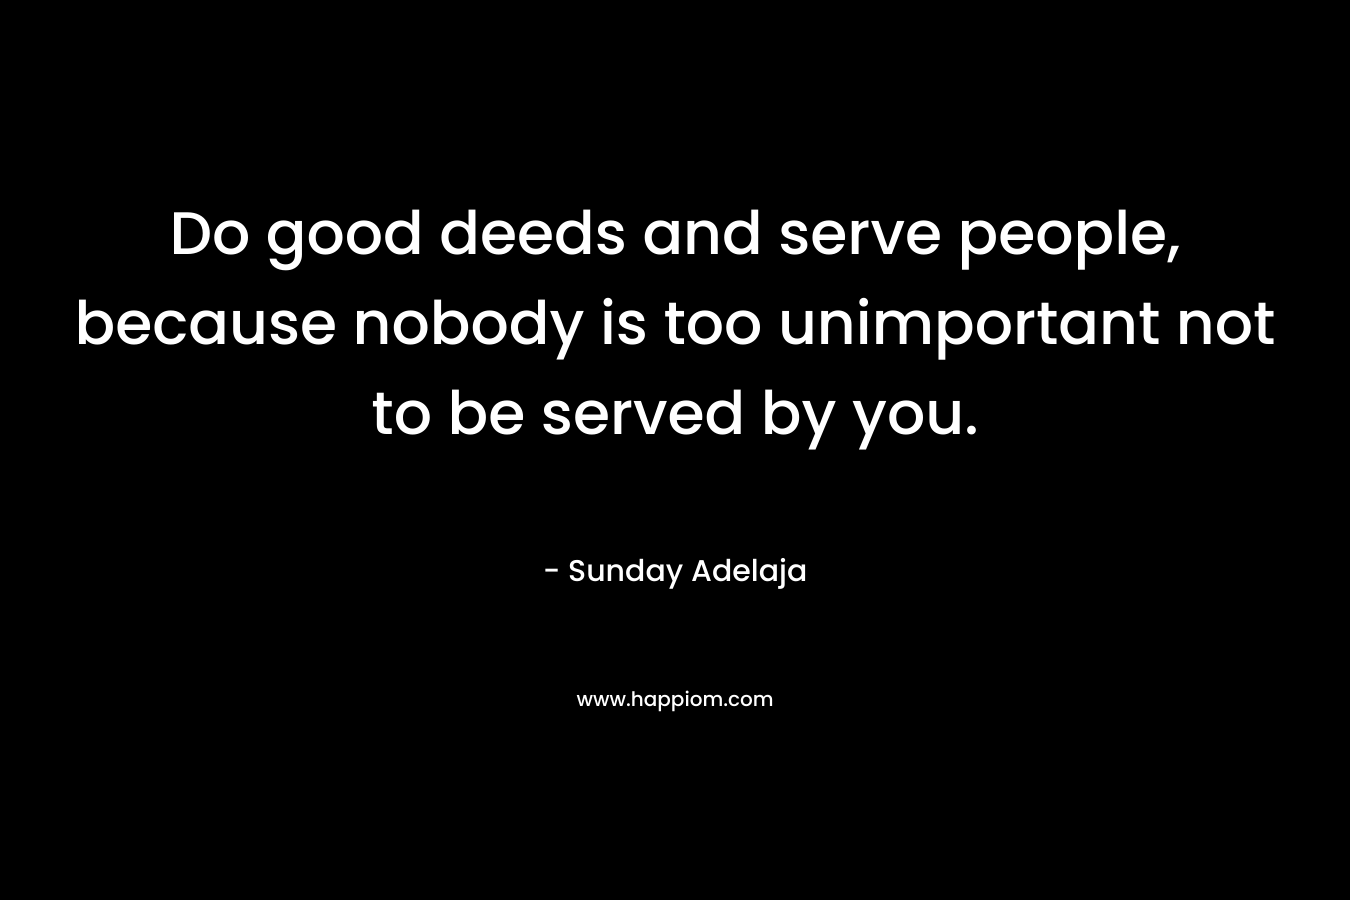 Do good deeds and serve people, because nobody is too unimportant not to be served by you. – Sunday Adelaja